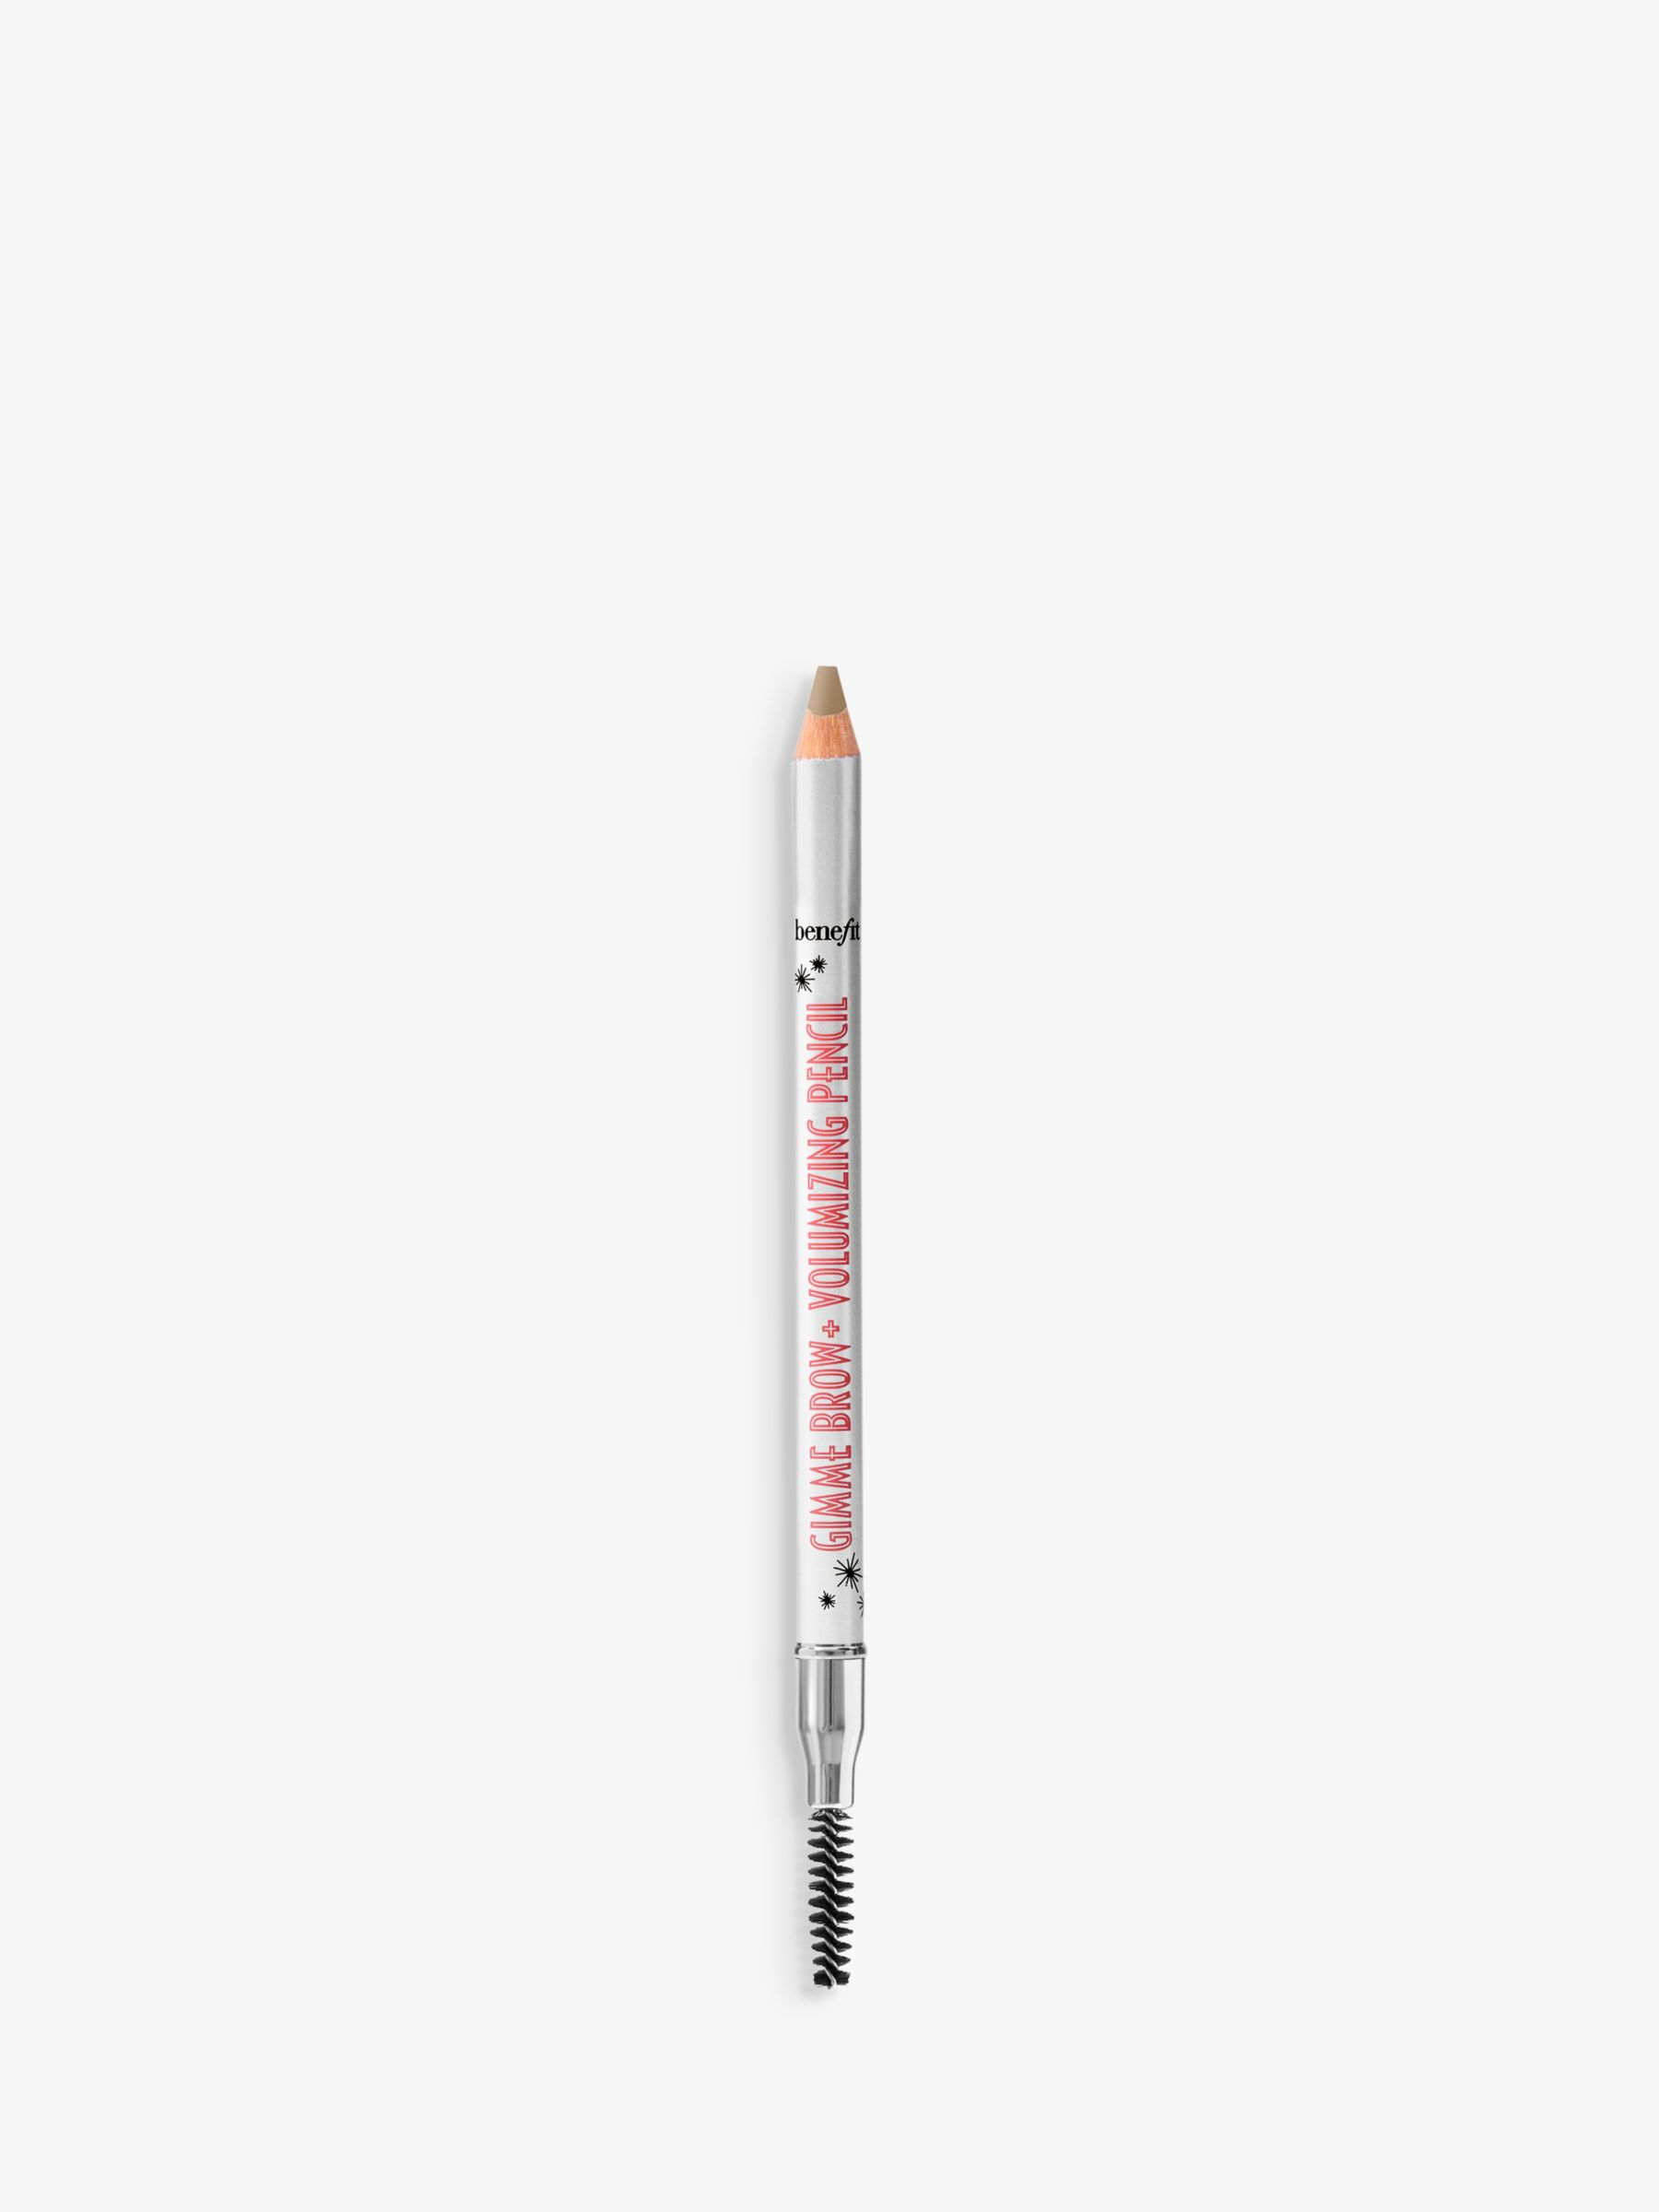 Benefit Gimme Brow+ Volumising Pencil, 01 Cool Light Blonde 1